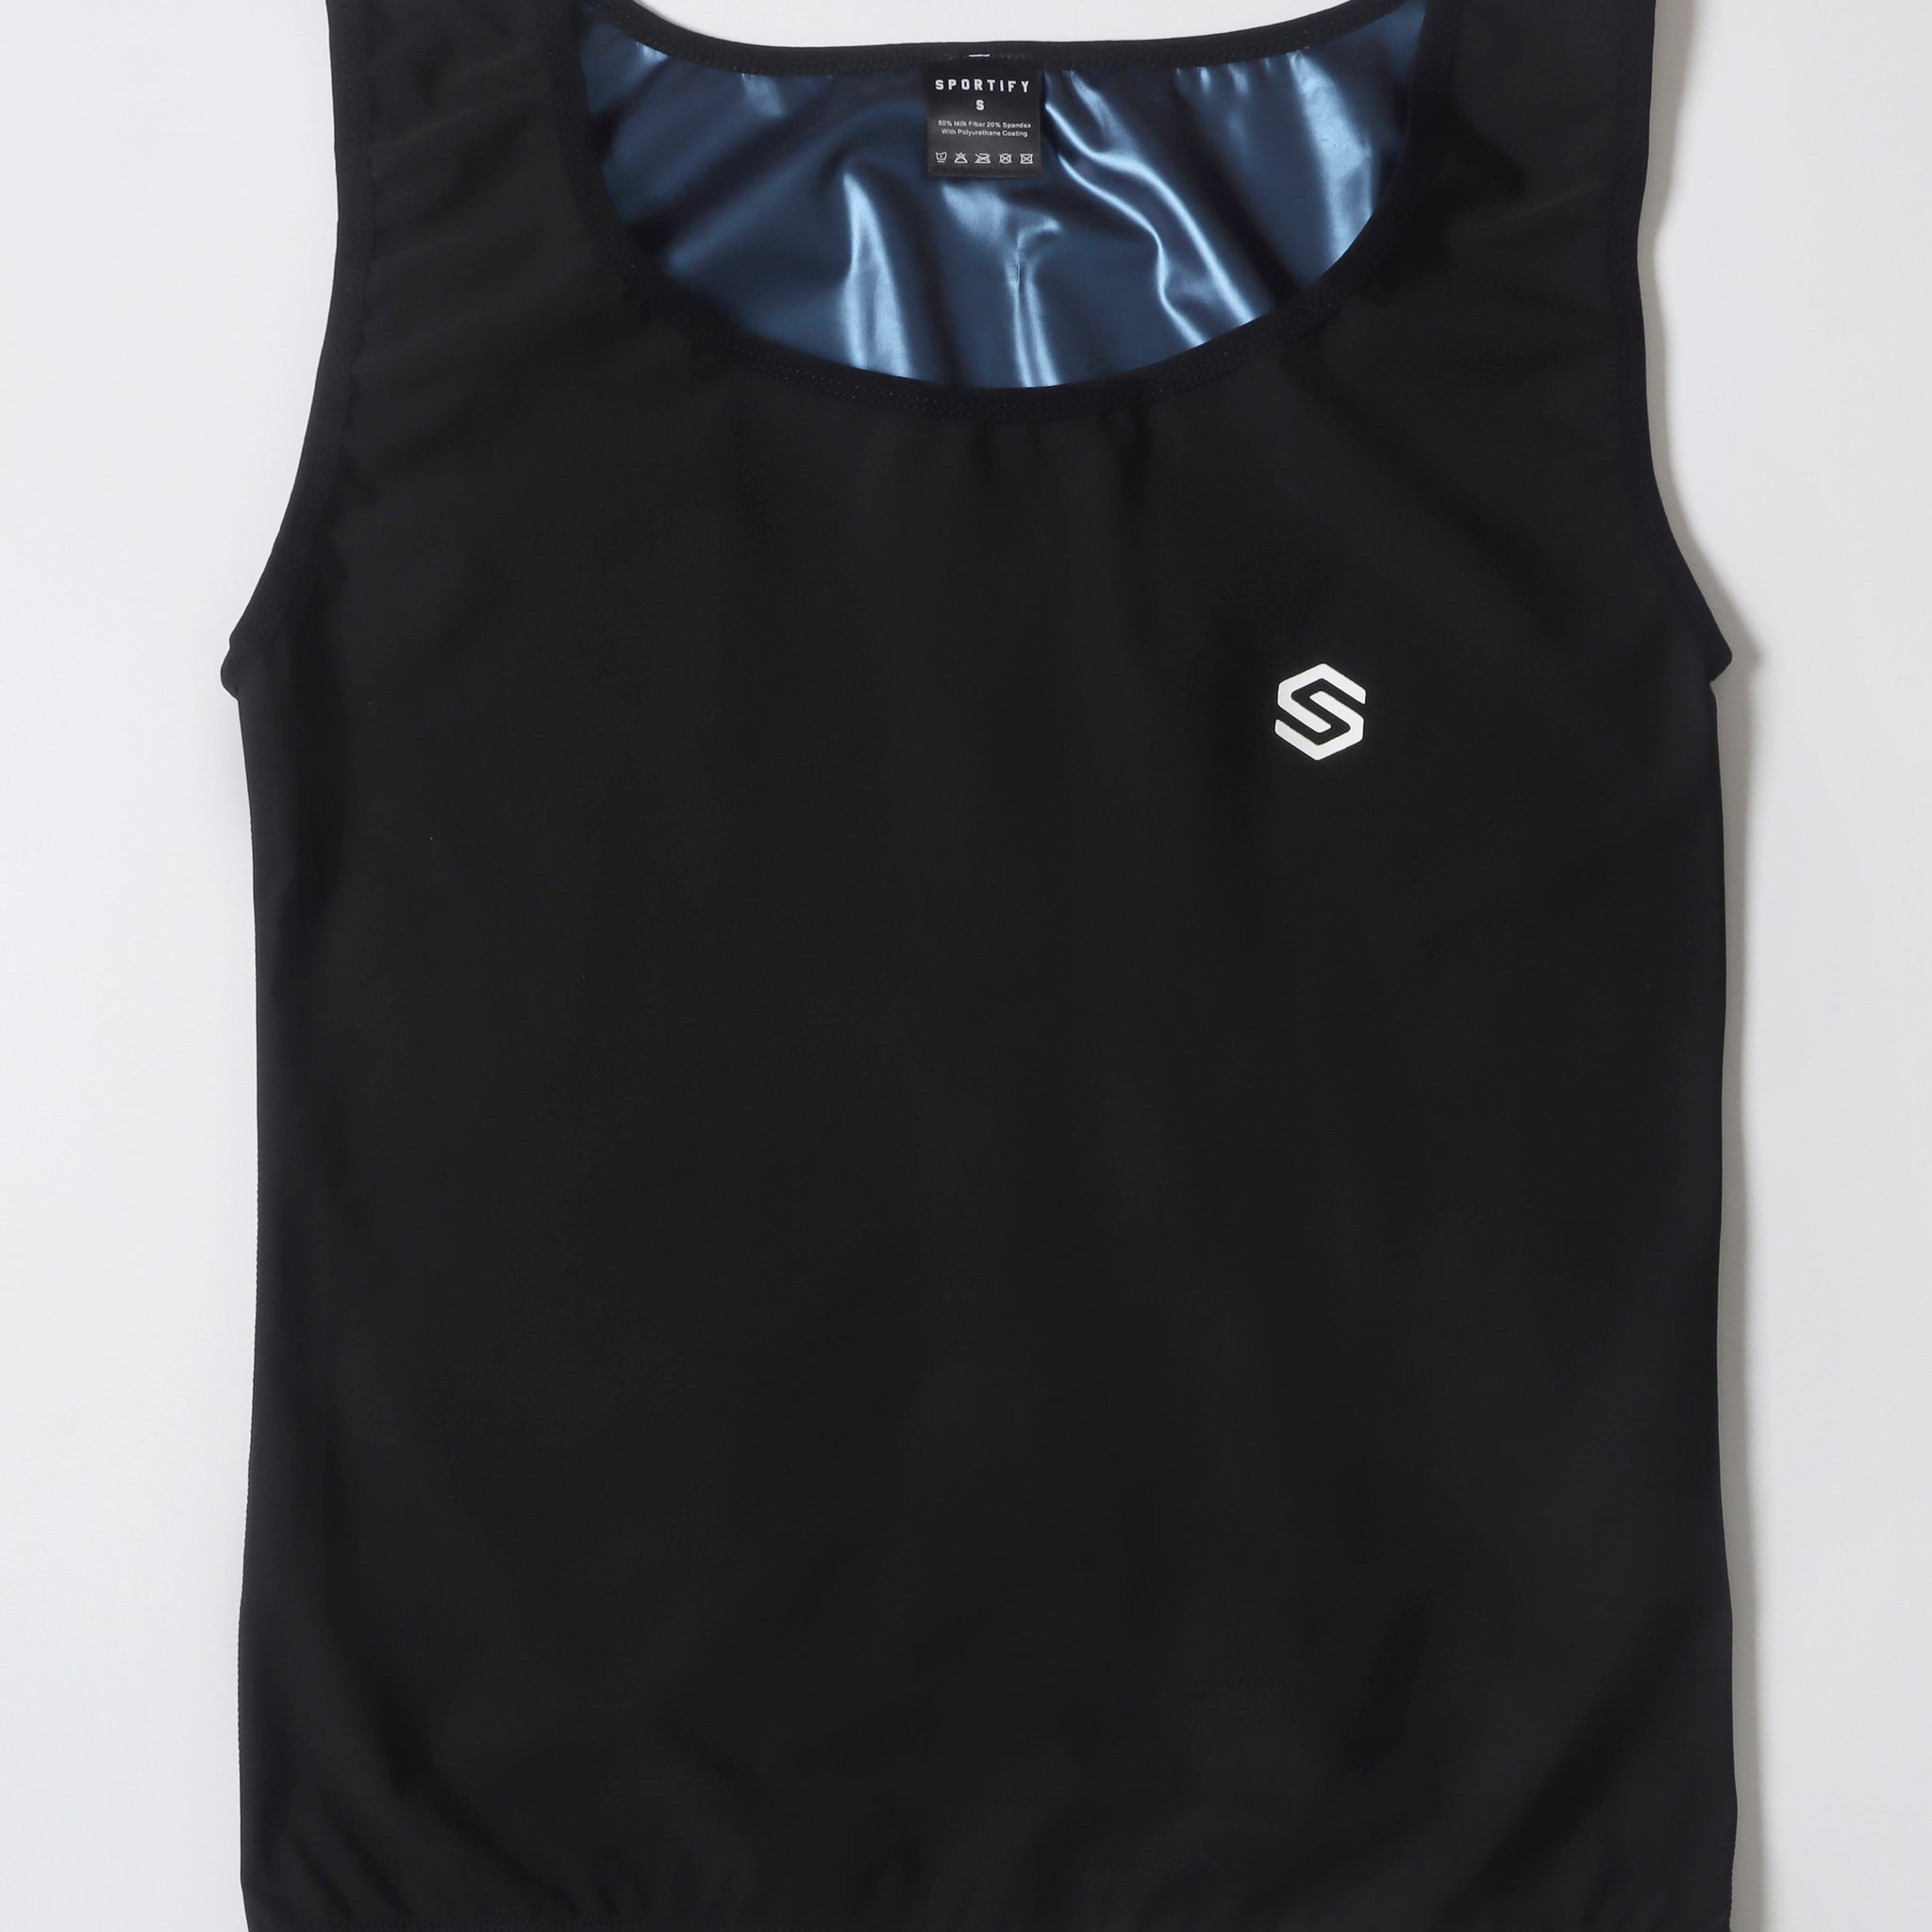 Waistband Polymer trapping Tank - Inner Blue